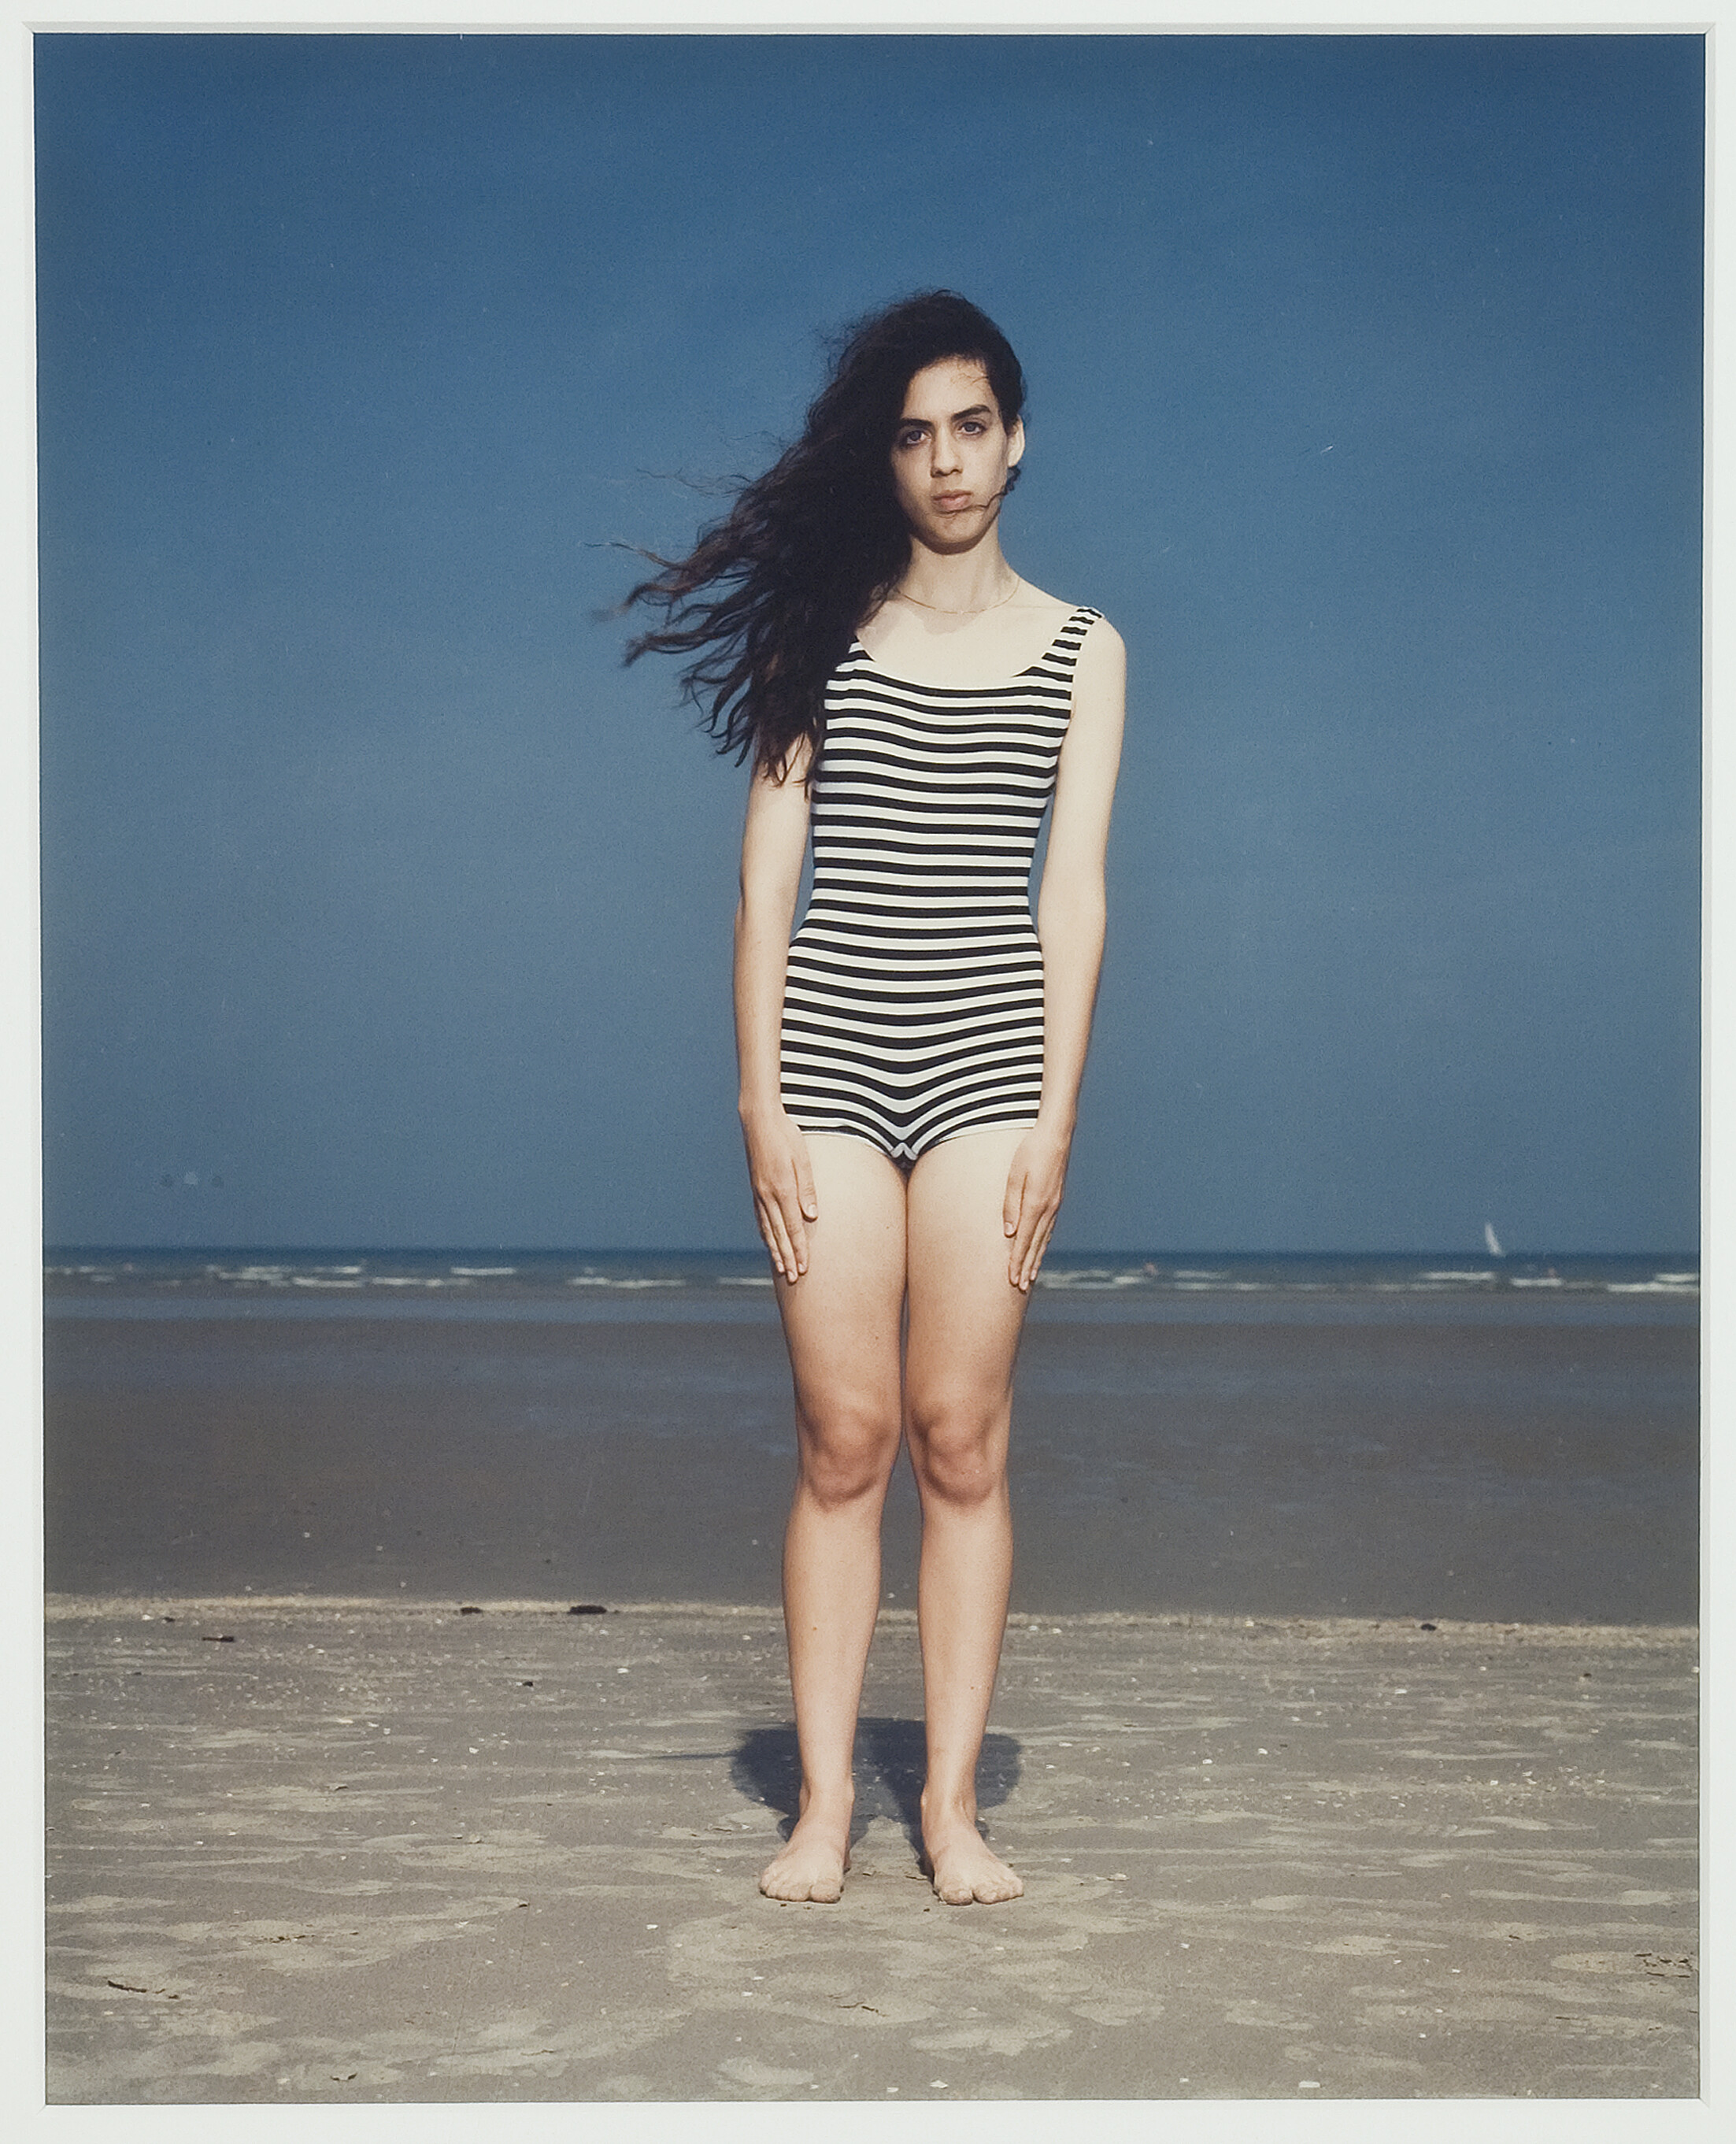 A light-skinned person wearing a black and white striped bathing suit standing at the beach with their back turned towards the ocean. Their long dark hair is blowing in the wind and their arms are held straight at their sides.